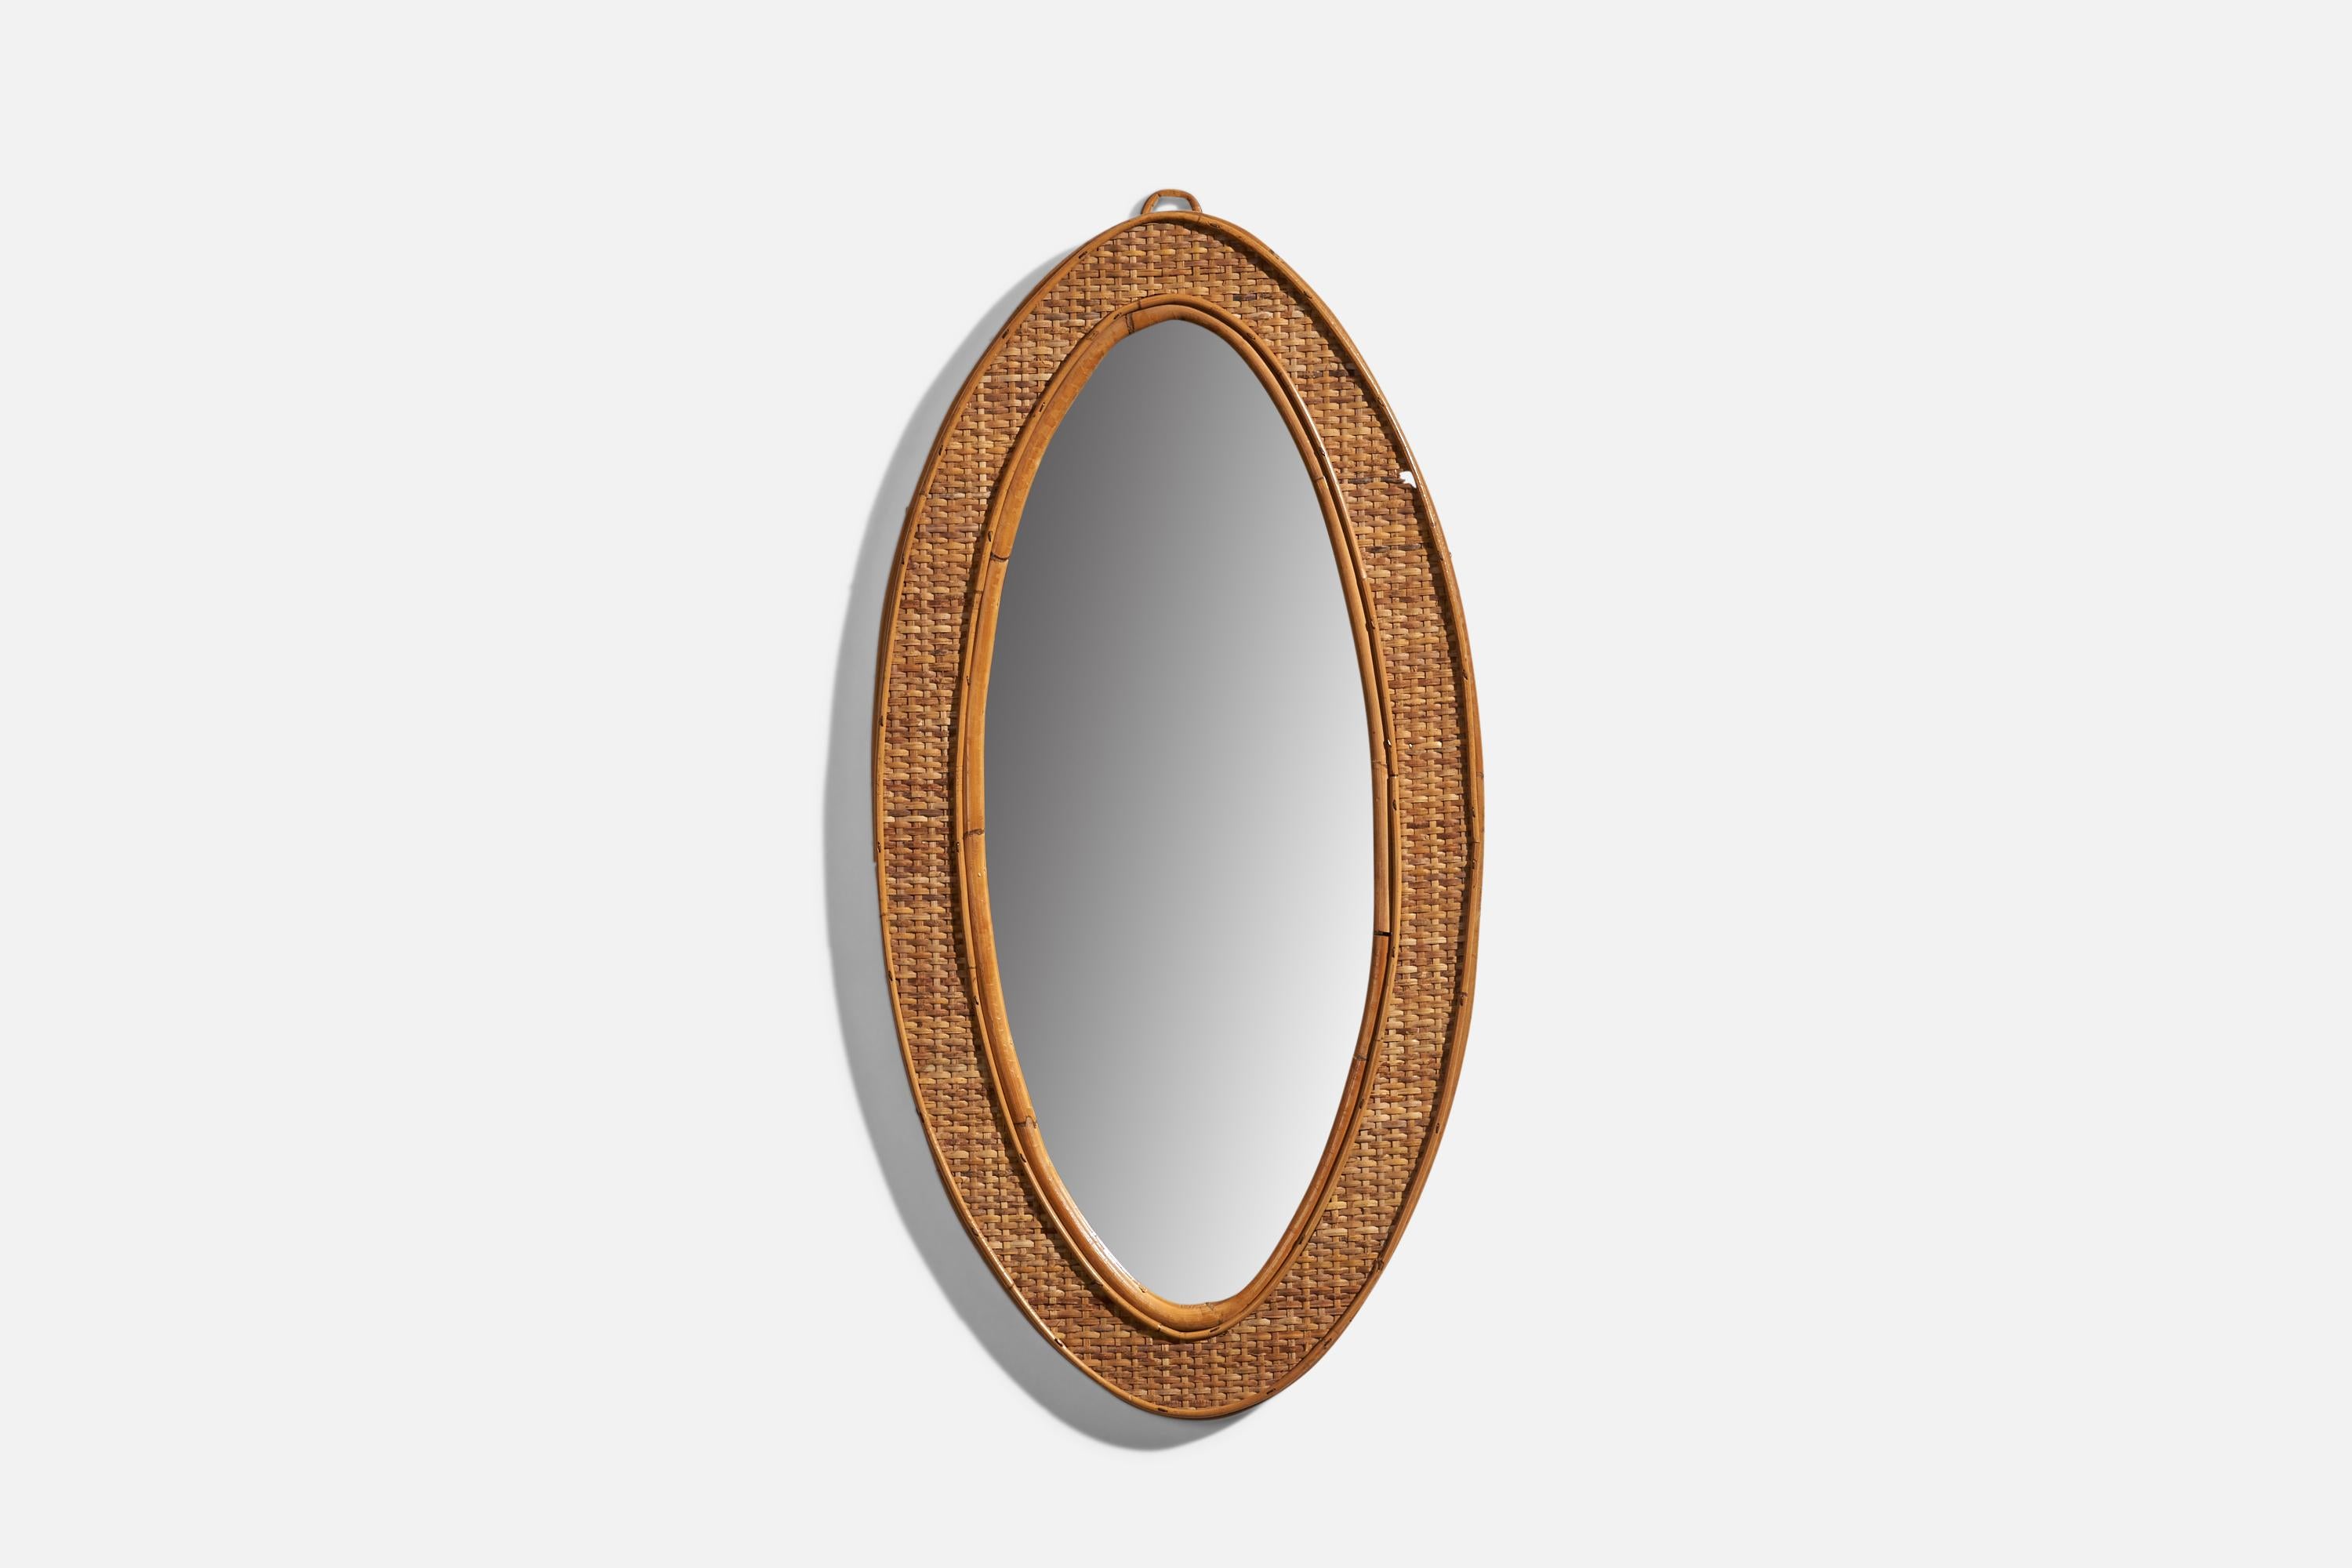 A rattan wall mirror designed and produced in Italy, 1970s.